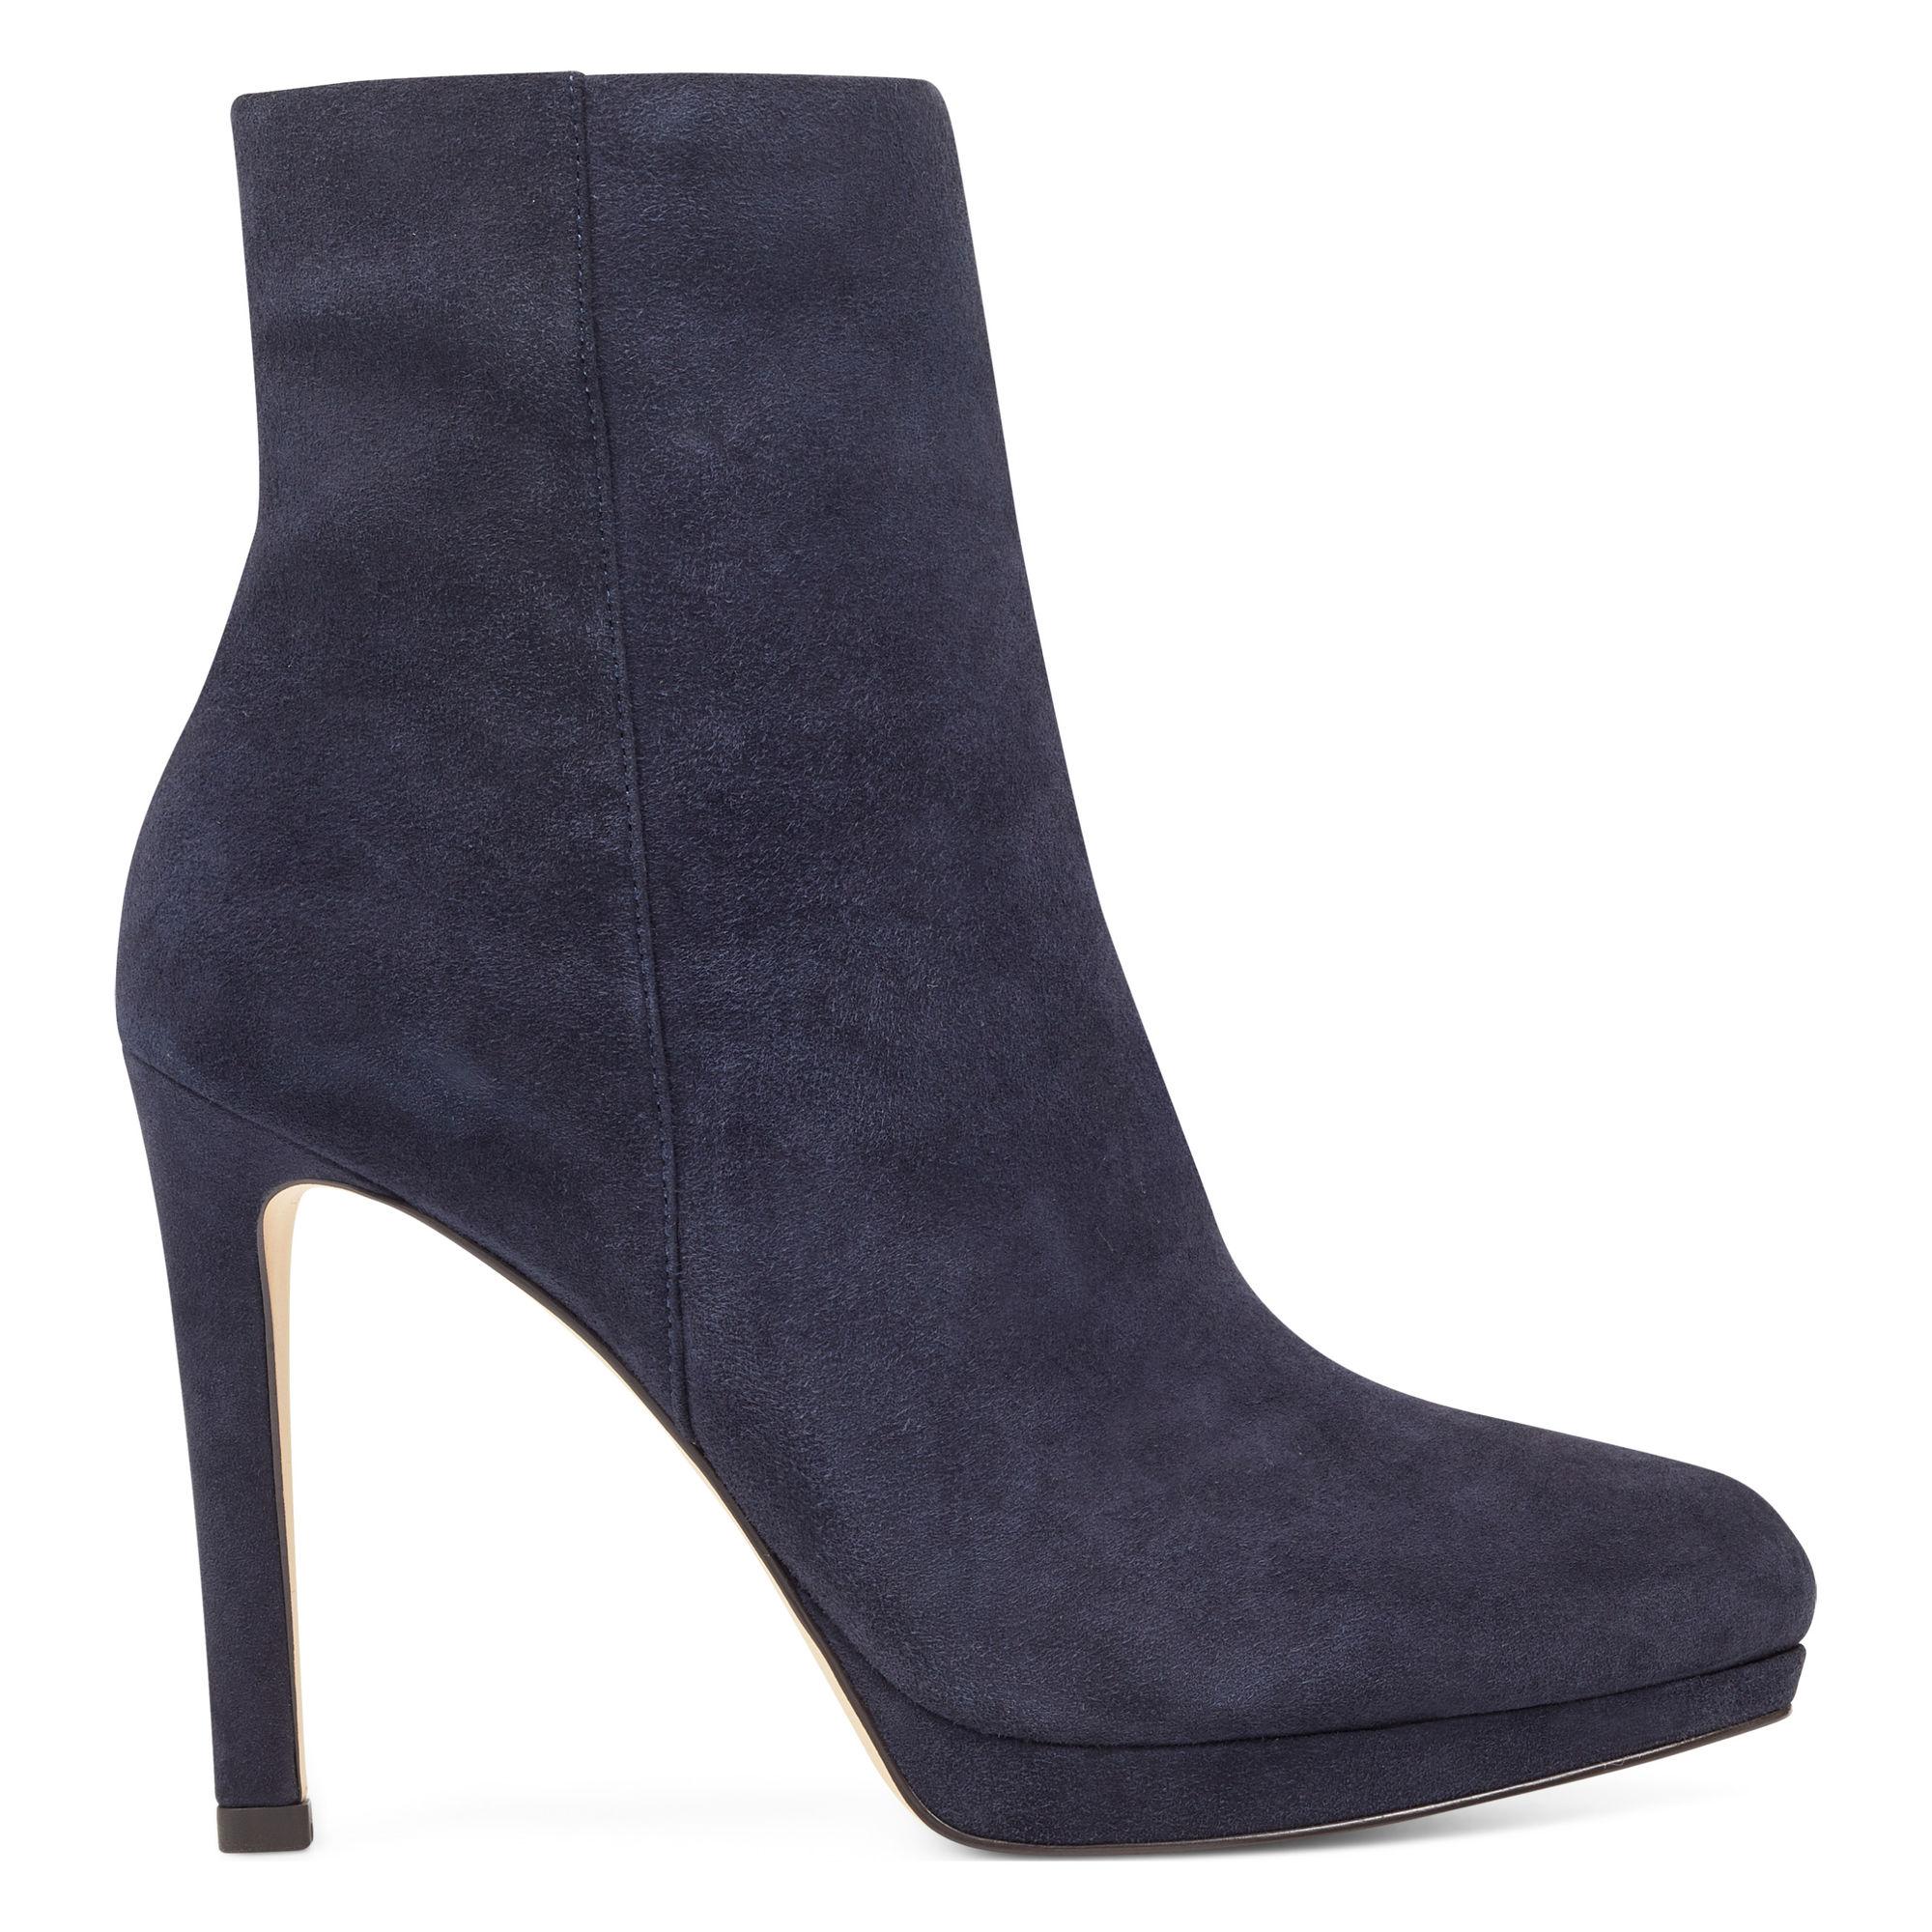 Nine West Leather Quanette Platform Booties in Navy Suede (Blue) - Lyst